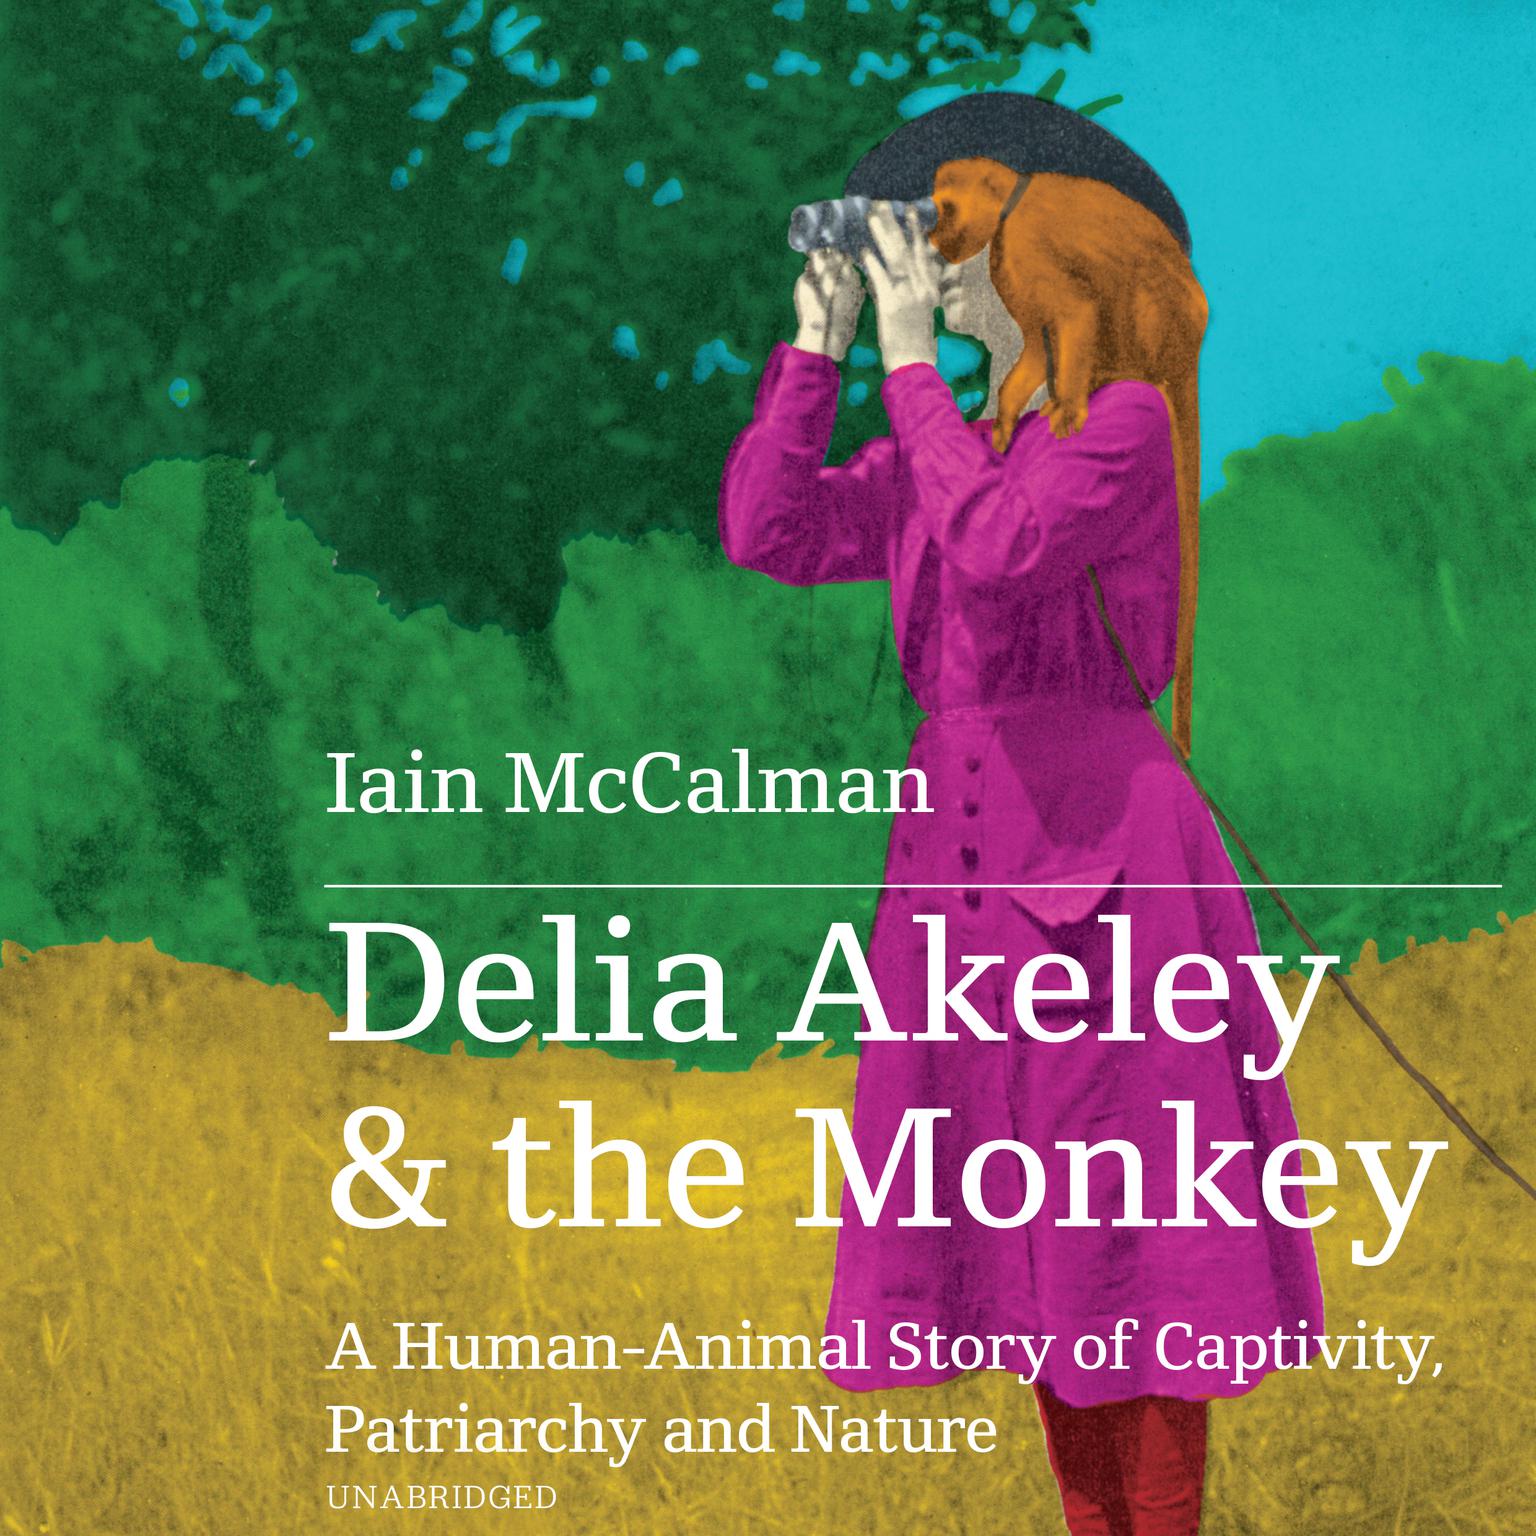 Delia Akeley and the Monkey: A Human-Animal Story of Captivity, Patriarchy, and Nature Audiobook, by Iain McCalman